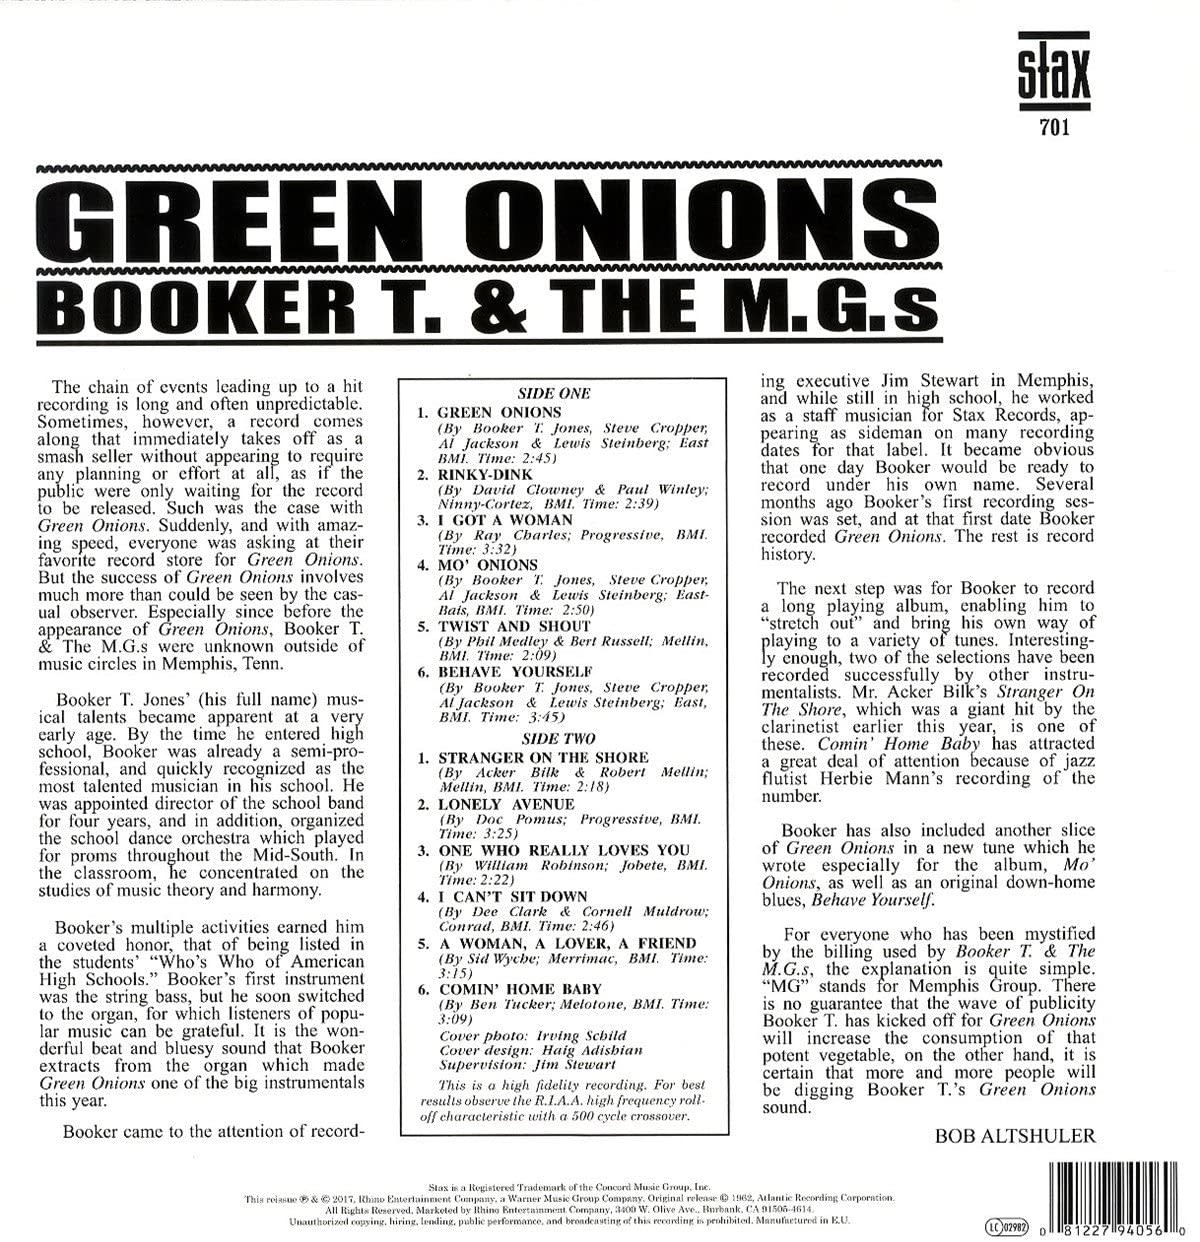 Booker T. & The M.G's - Green Onions